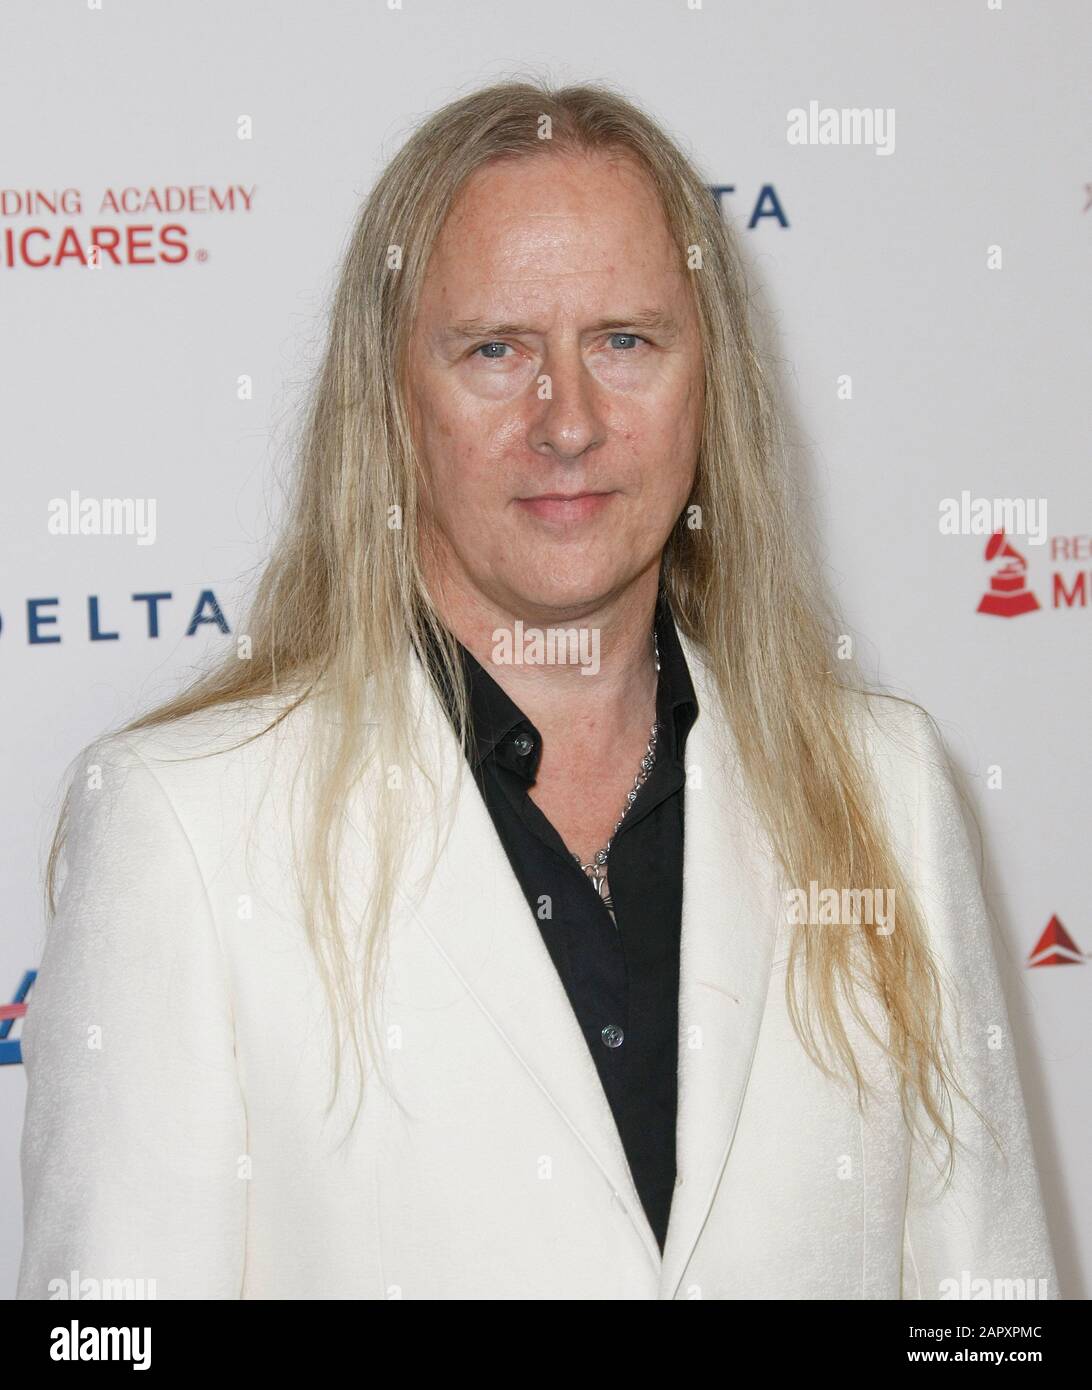 Los Angeles, Stati Uniti. 24th Gen 2020. Los ANGELES, CALIFORNIA - 24 GENNAIO: Alcie in Chains - Jerry Cantrell frequenta MusiCares Persona dell'anno onorando Aerosmith a West Hall al Los Angeles Convention Center il 24 gennaio 2020 a Los Angeles, California. Foto: Crash/Imagespace Credit: Imagespace/Alamy Live News Foto Stock